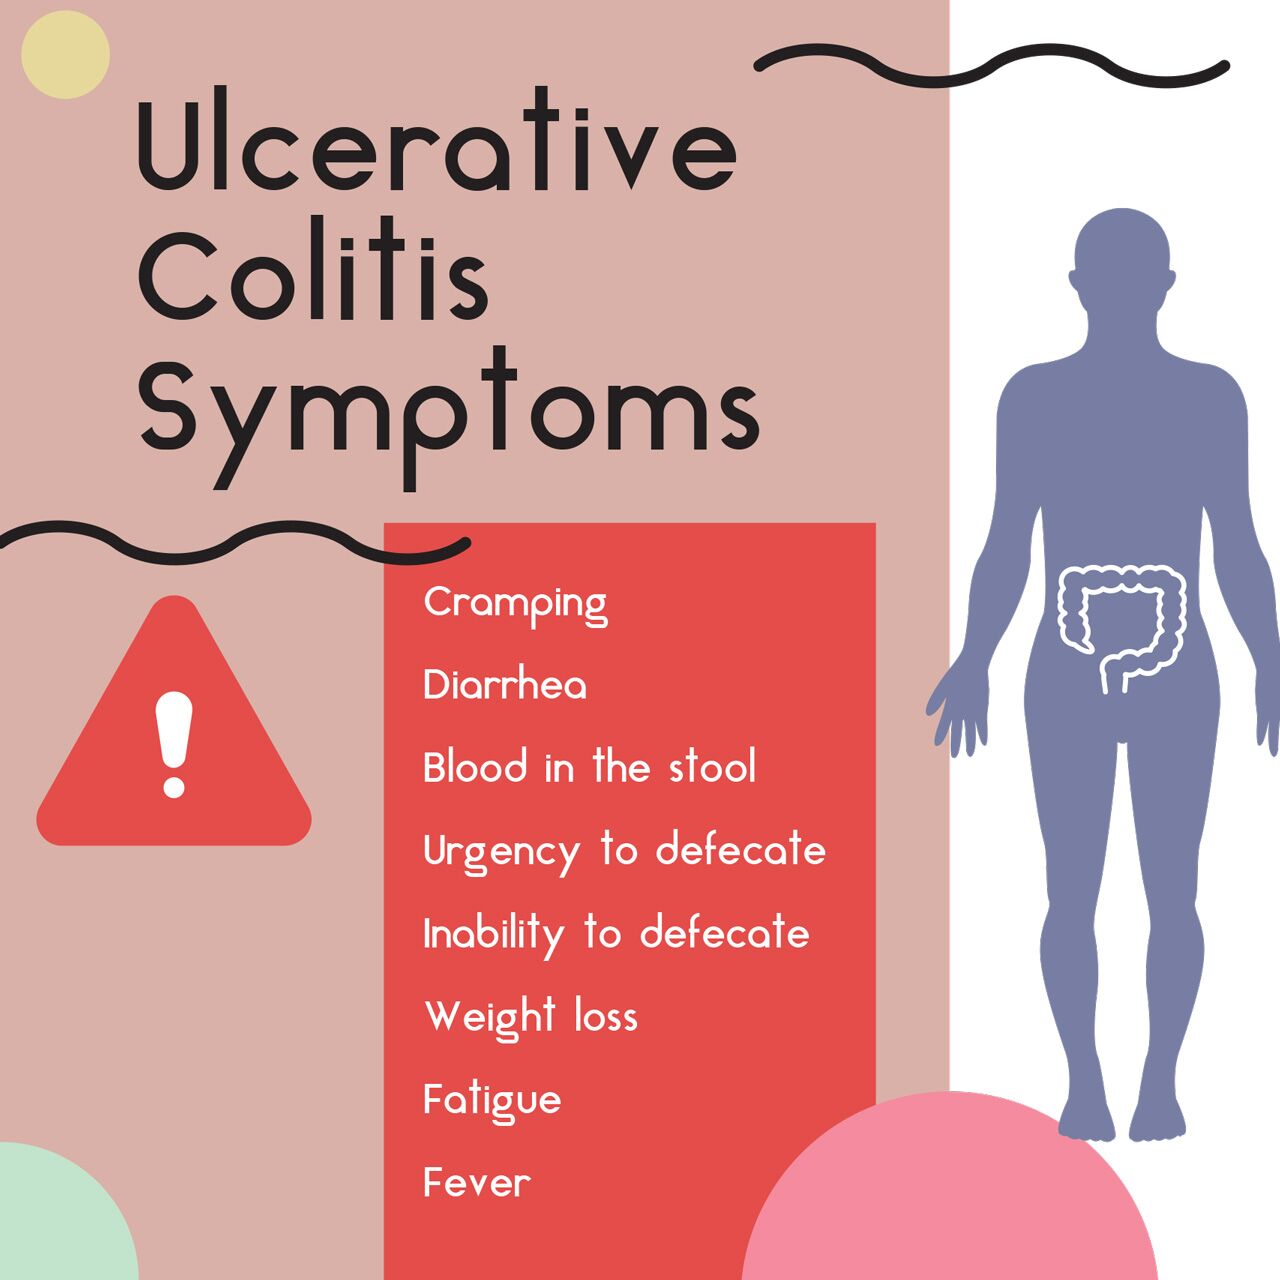 What Is Ulcerative Colitis: Causes, Symptoms, Treatments â The Amino ...